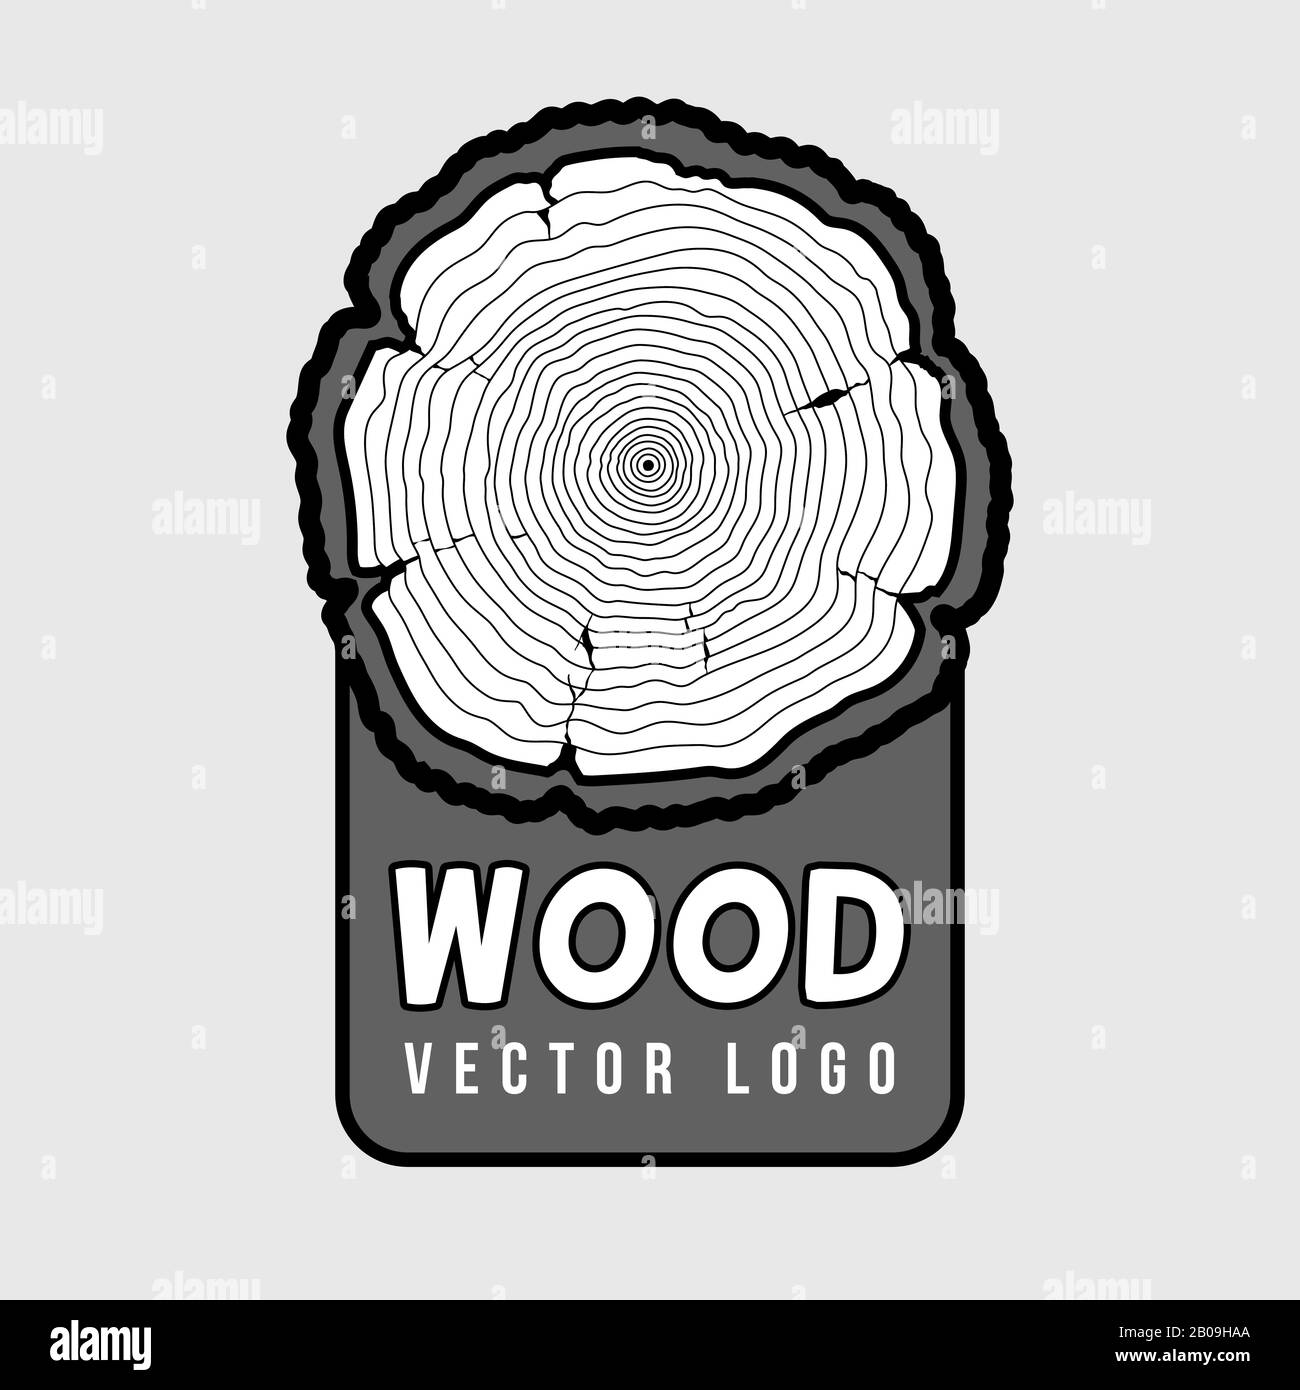 Annual tree growth rings, trunk cross section hipster vector log. Bark concentric cut design illustration Stock Vector